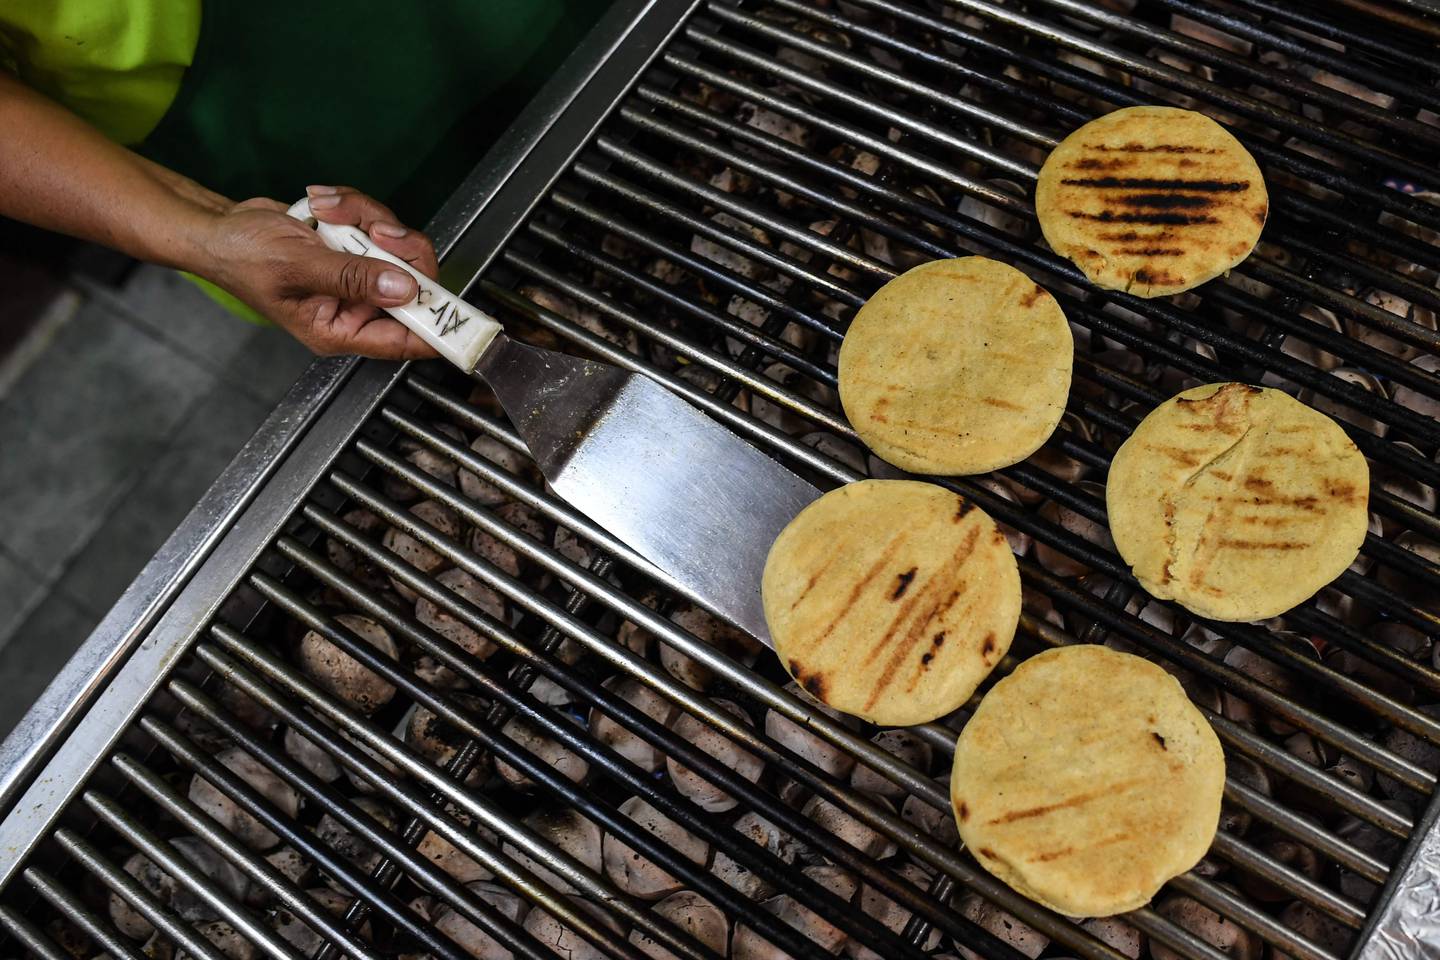 A man prepares arepas, made from maize, the most popular and traditional food in Venezuela, at a restaurant in Caracas, on October 28, 2021. AFP